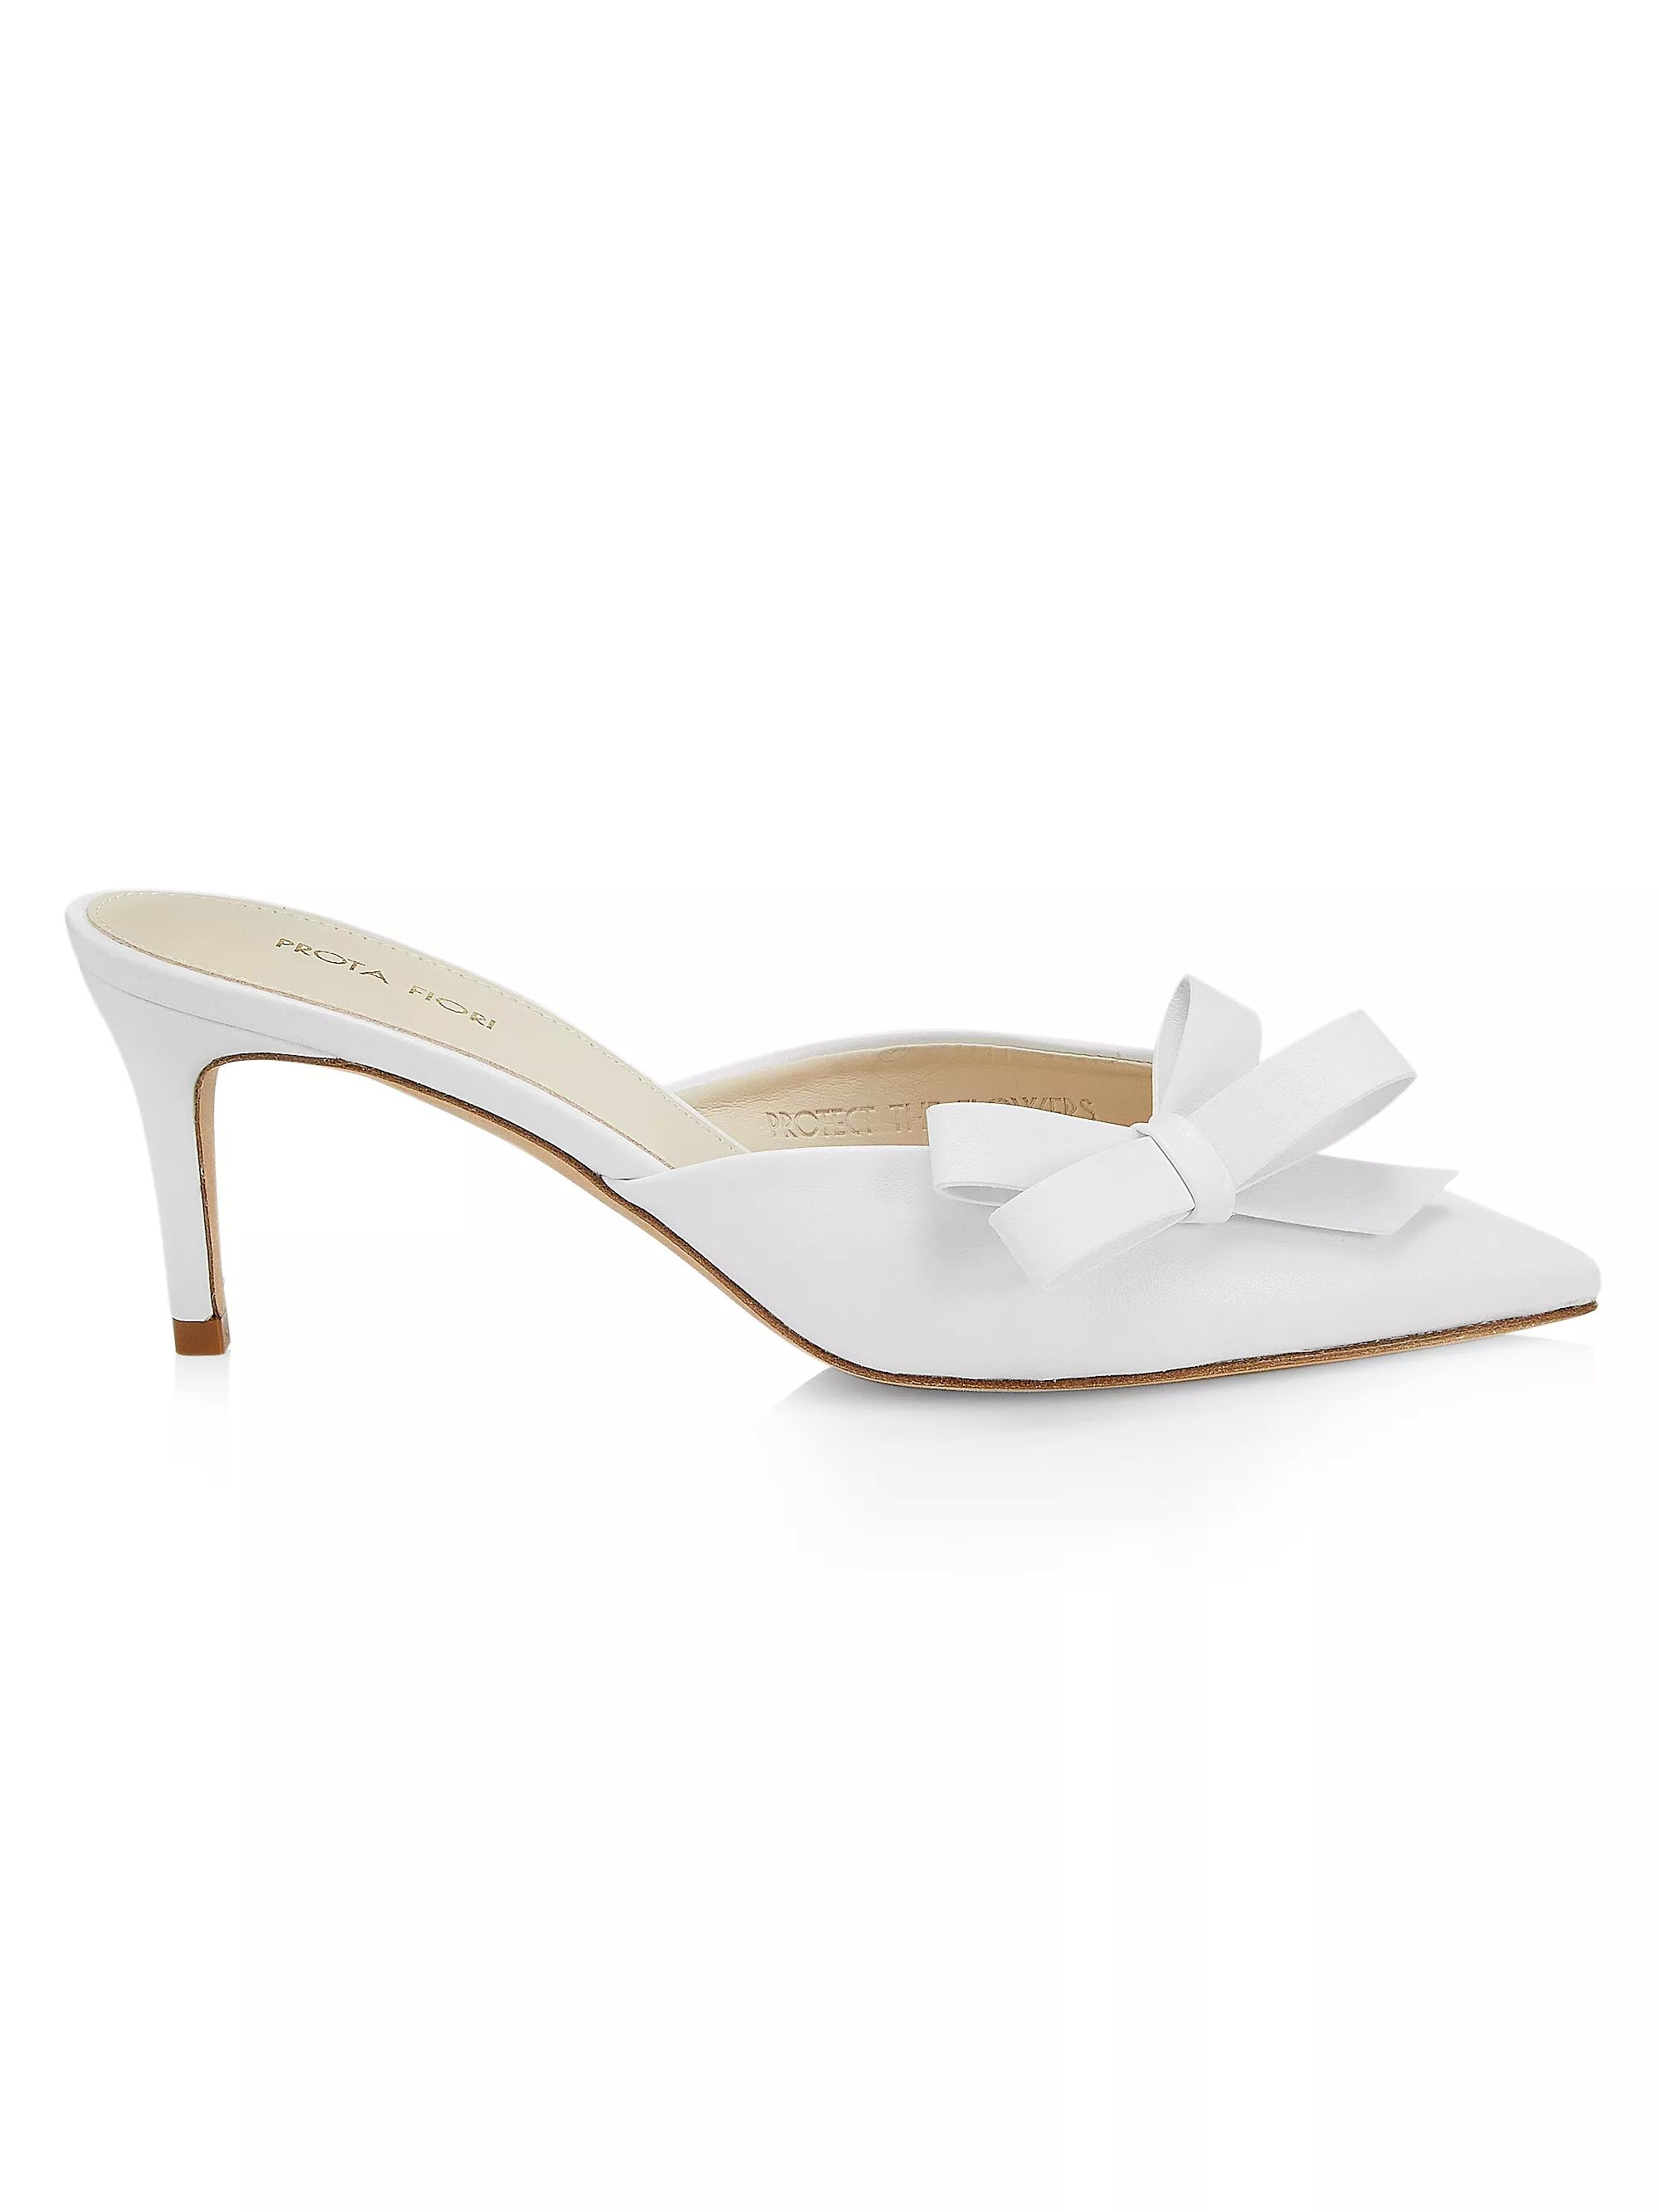 Ortensia 75MM Bow Mules | Saks Fifth Avenue